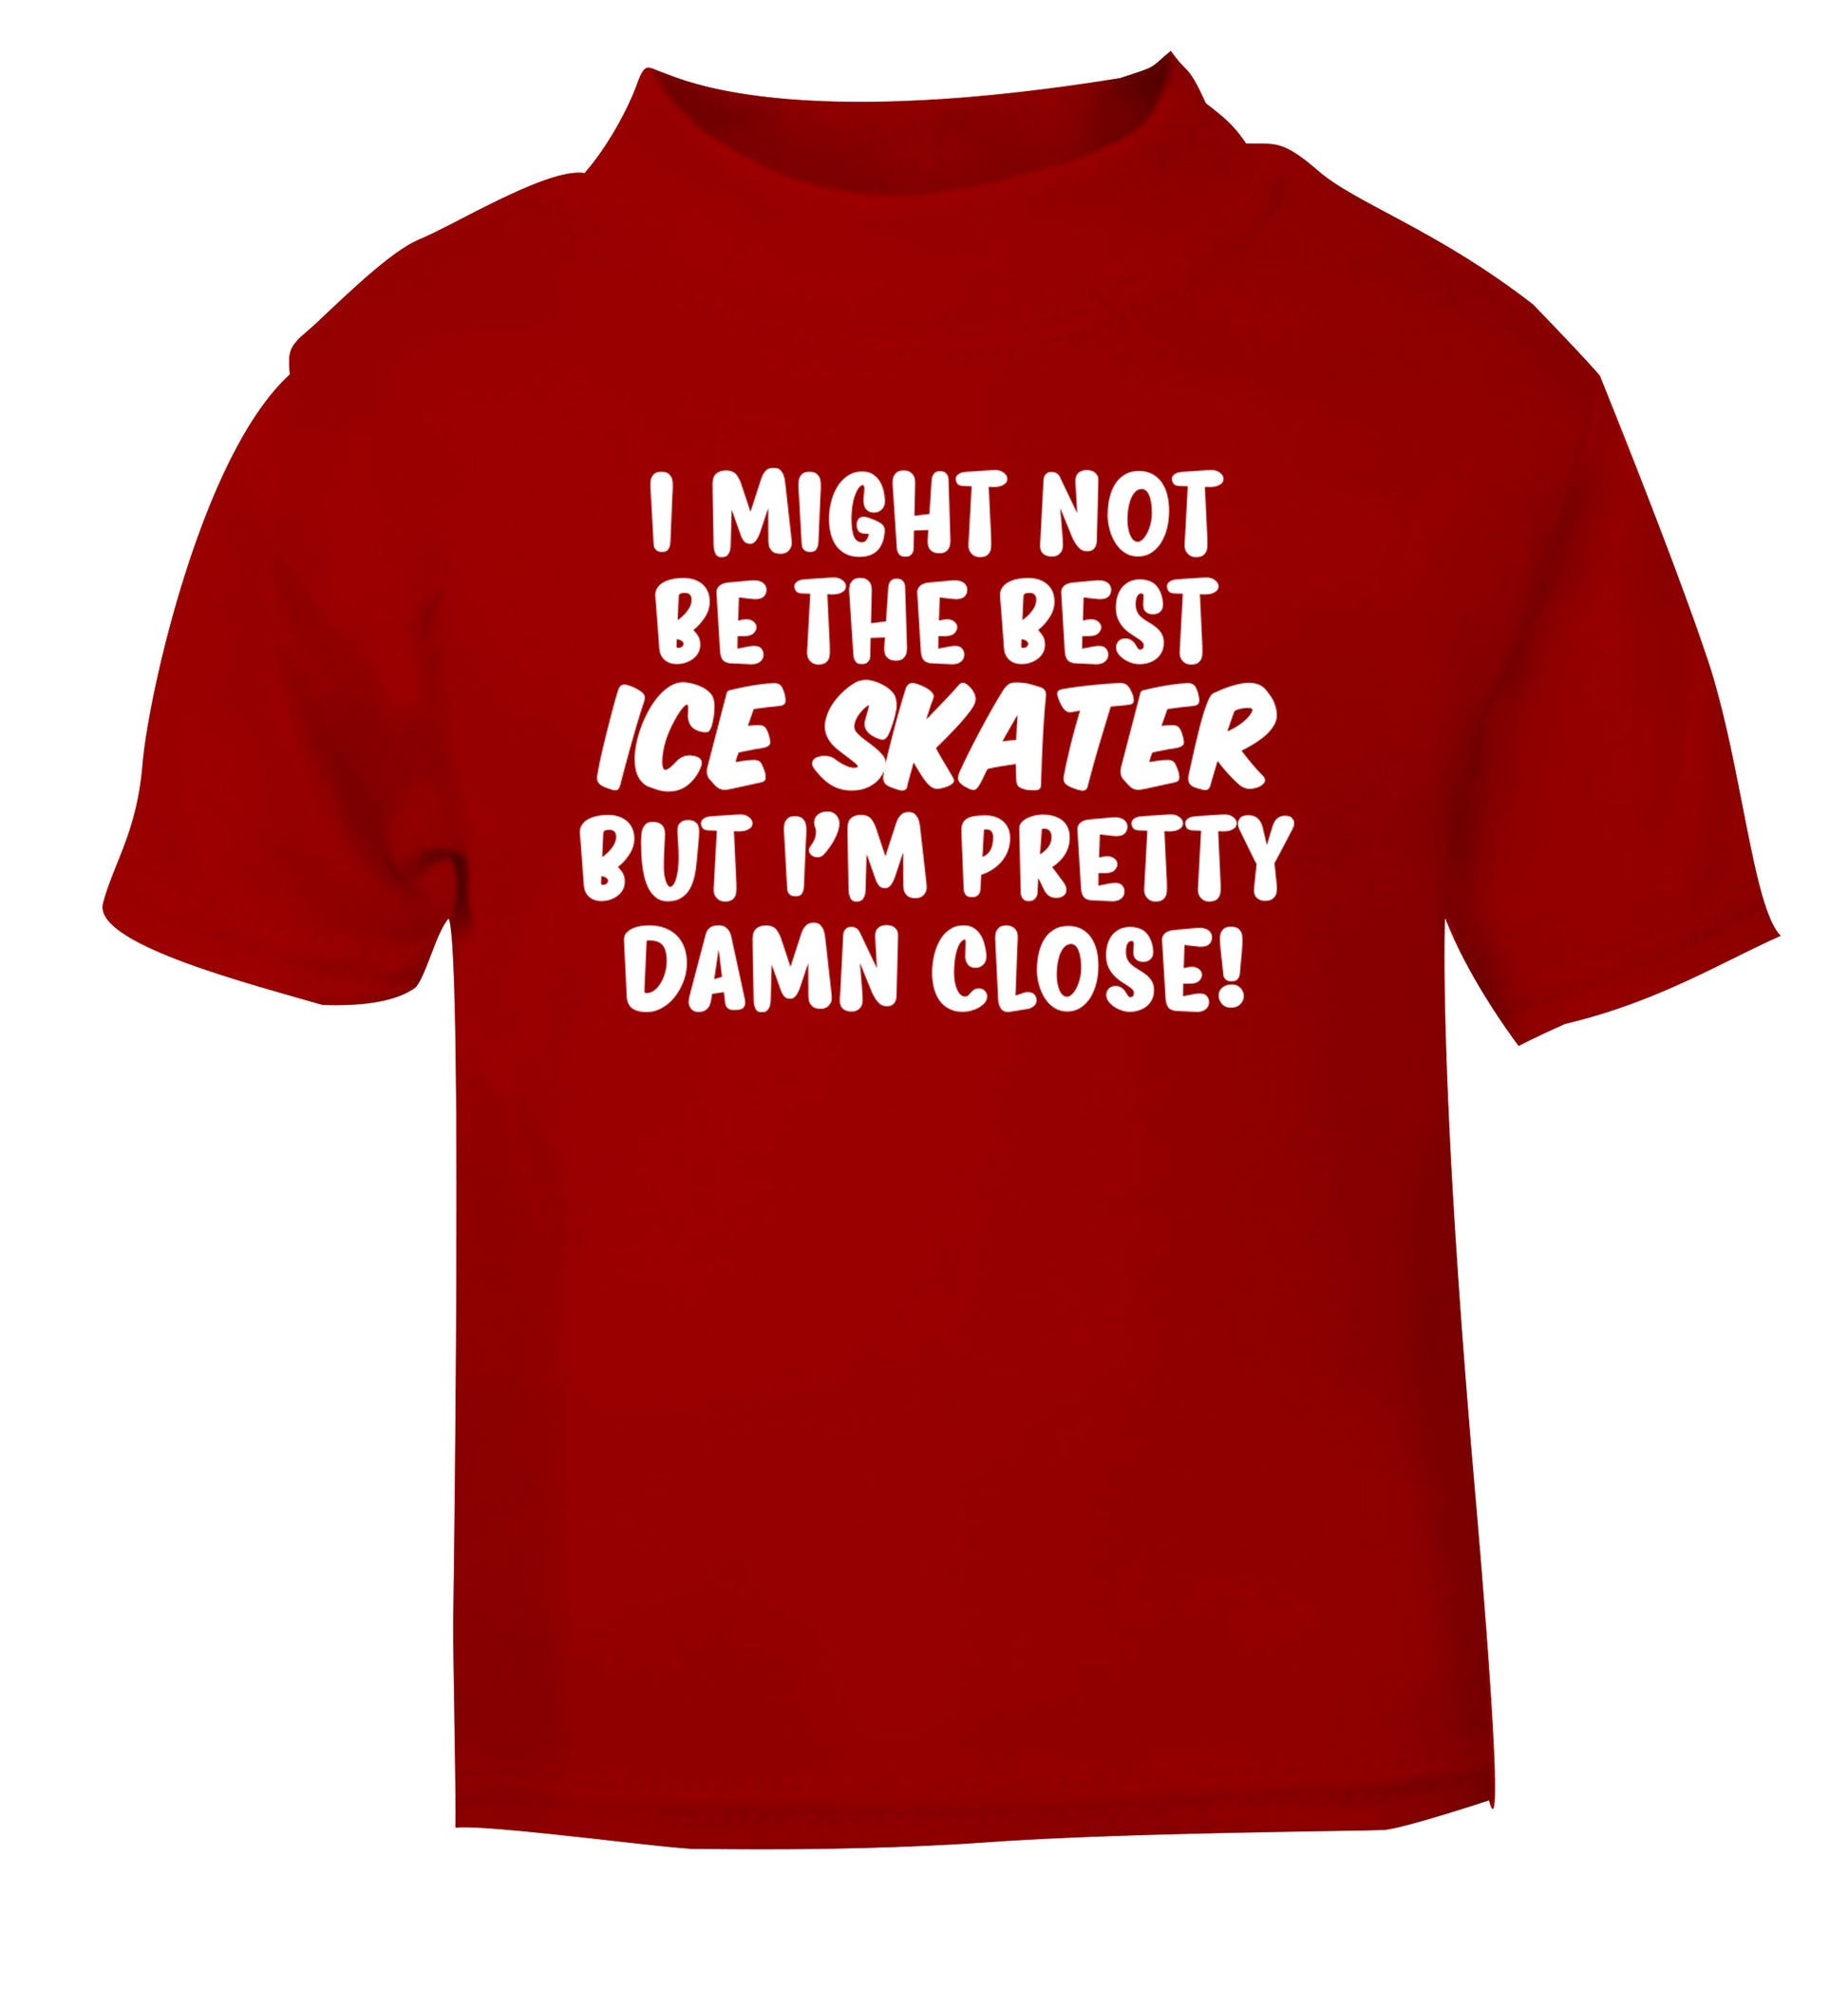 I might not be the best ice skater but I'm pretty damn close! red Baby Toddler Tshirt 2 Years